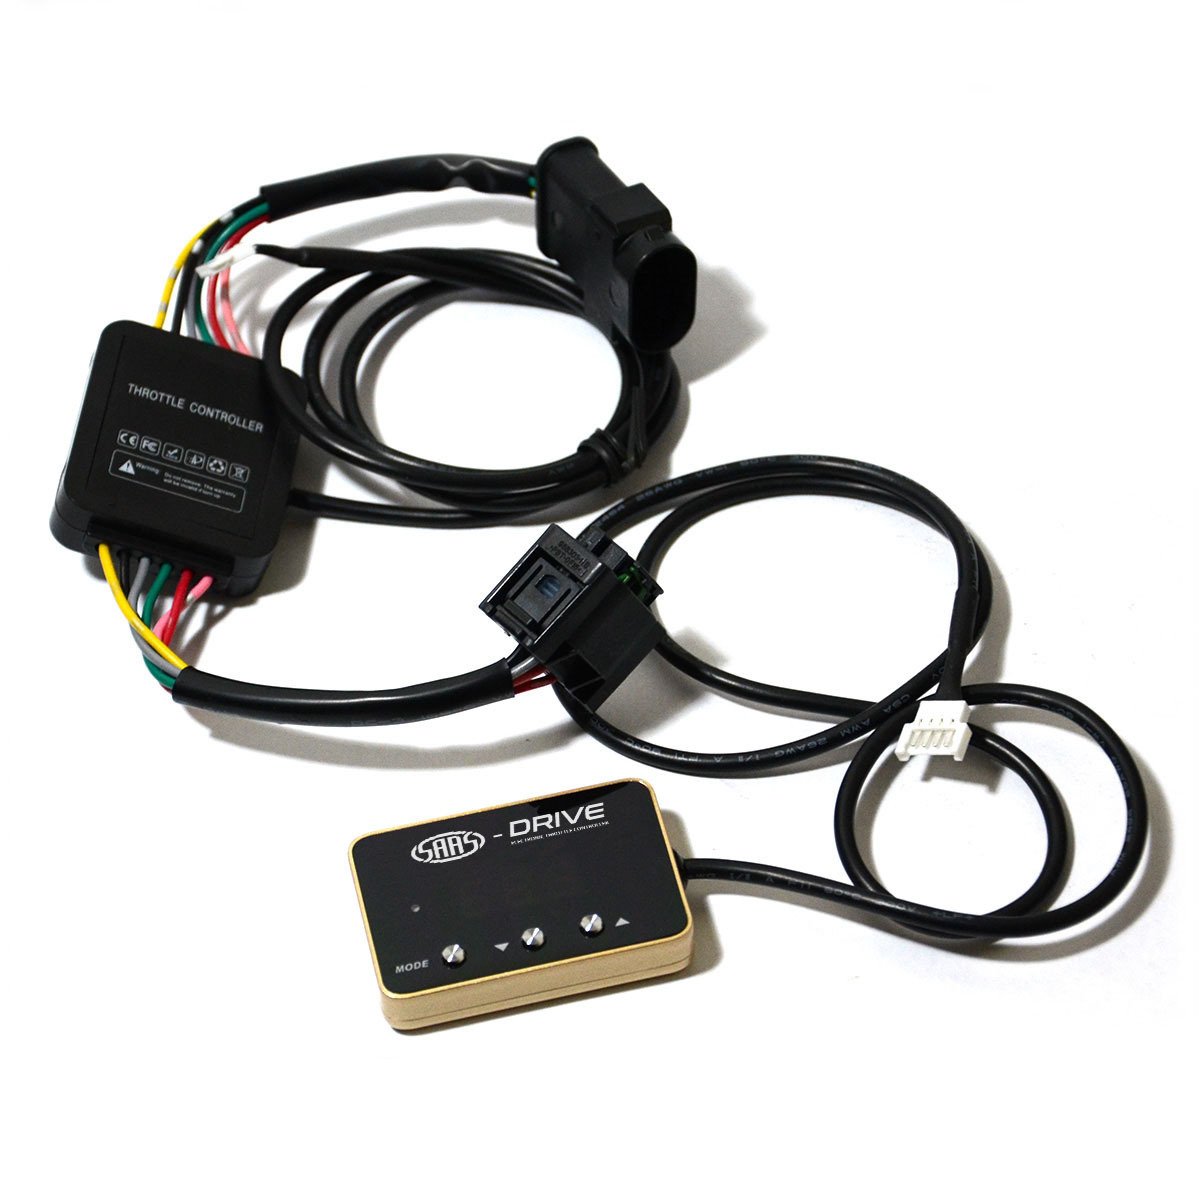 SAAS-Drive Great Wall X 240 2006 - 2012 Throttle Controller 